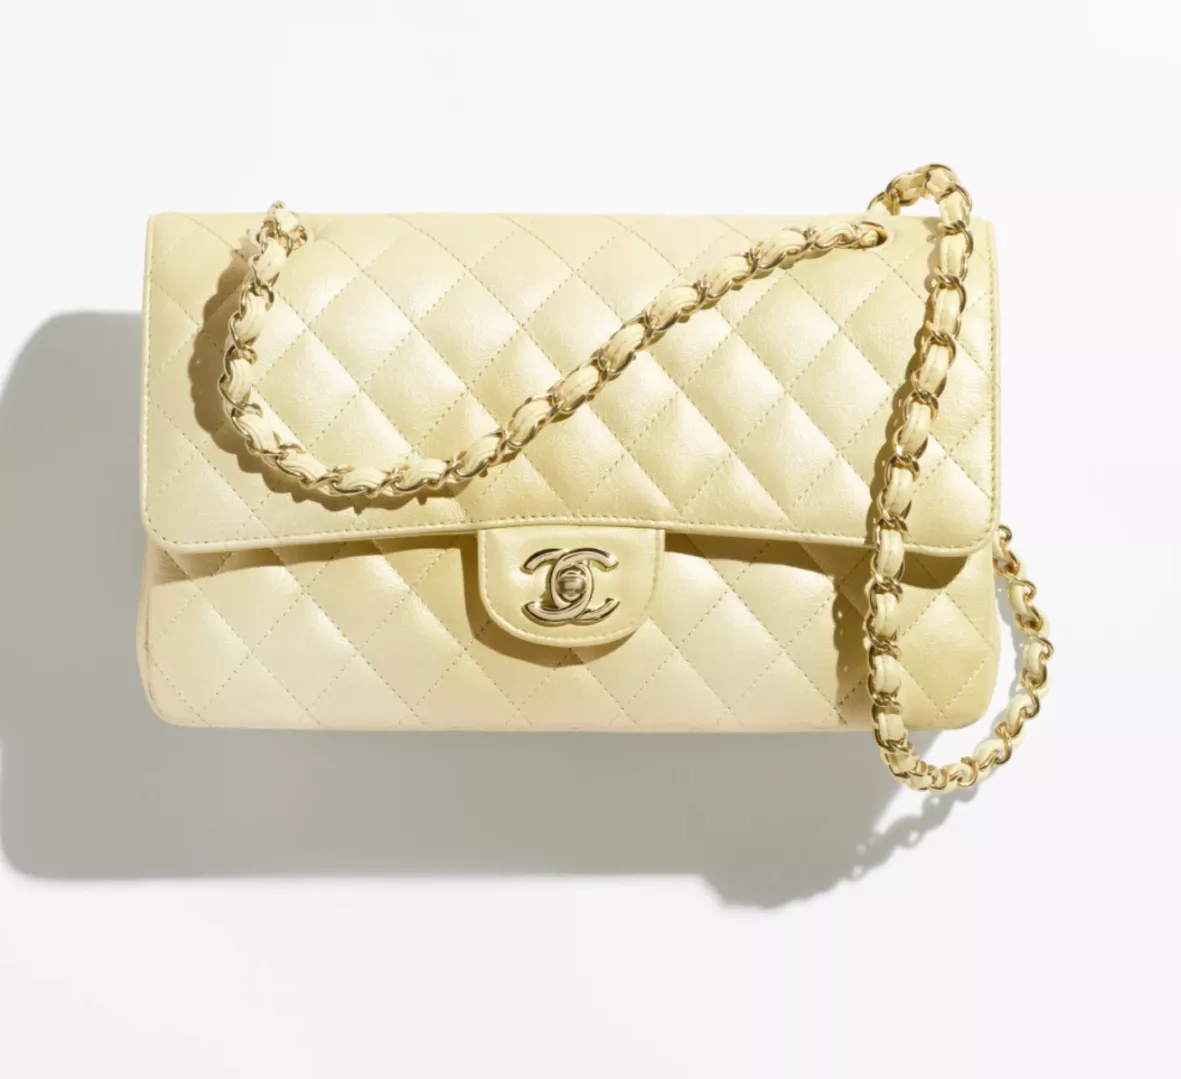 Obsessed with this Chanel medium flap. Loving the ease of this